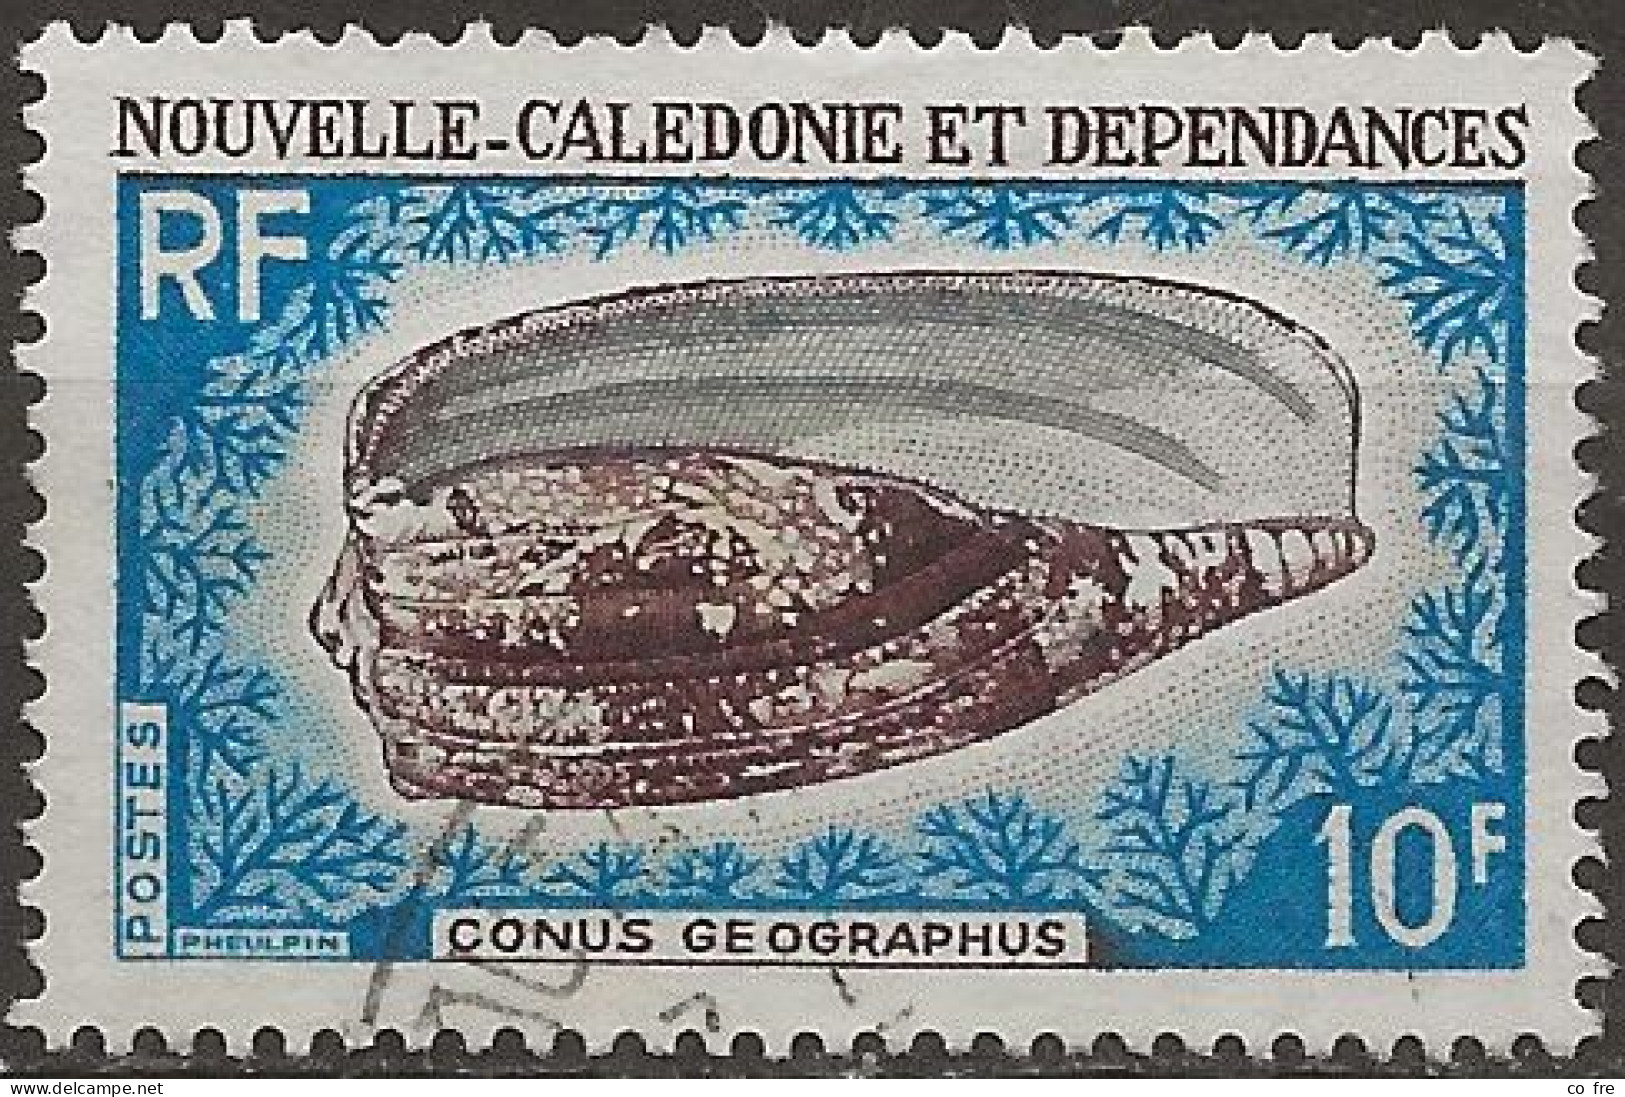 Nouvelle-Calédonie N°354 (ref.2) - Used Stamps